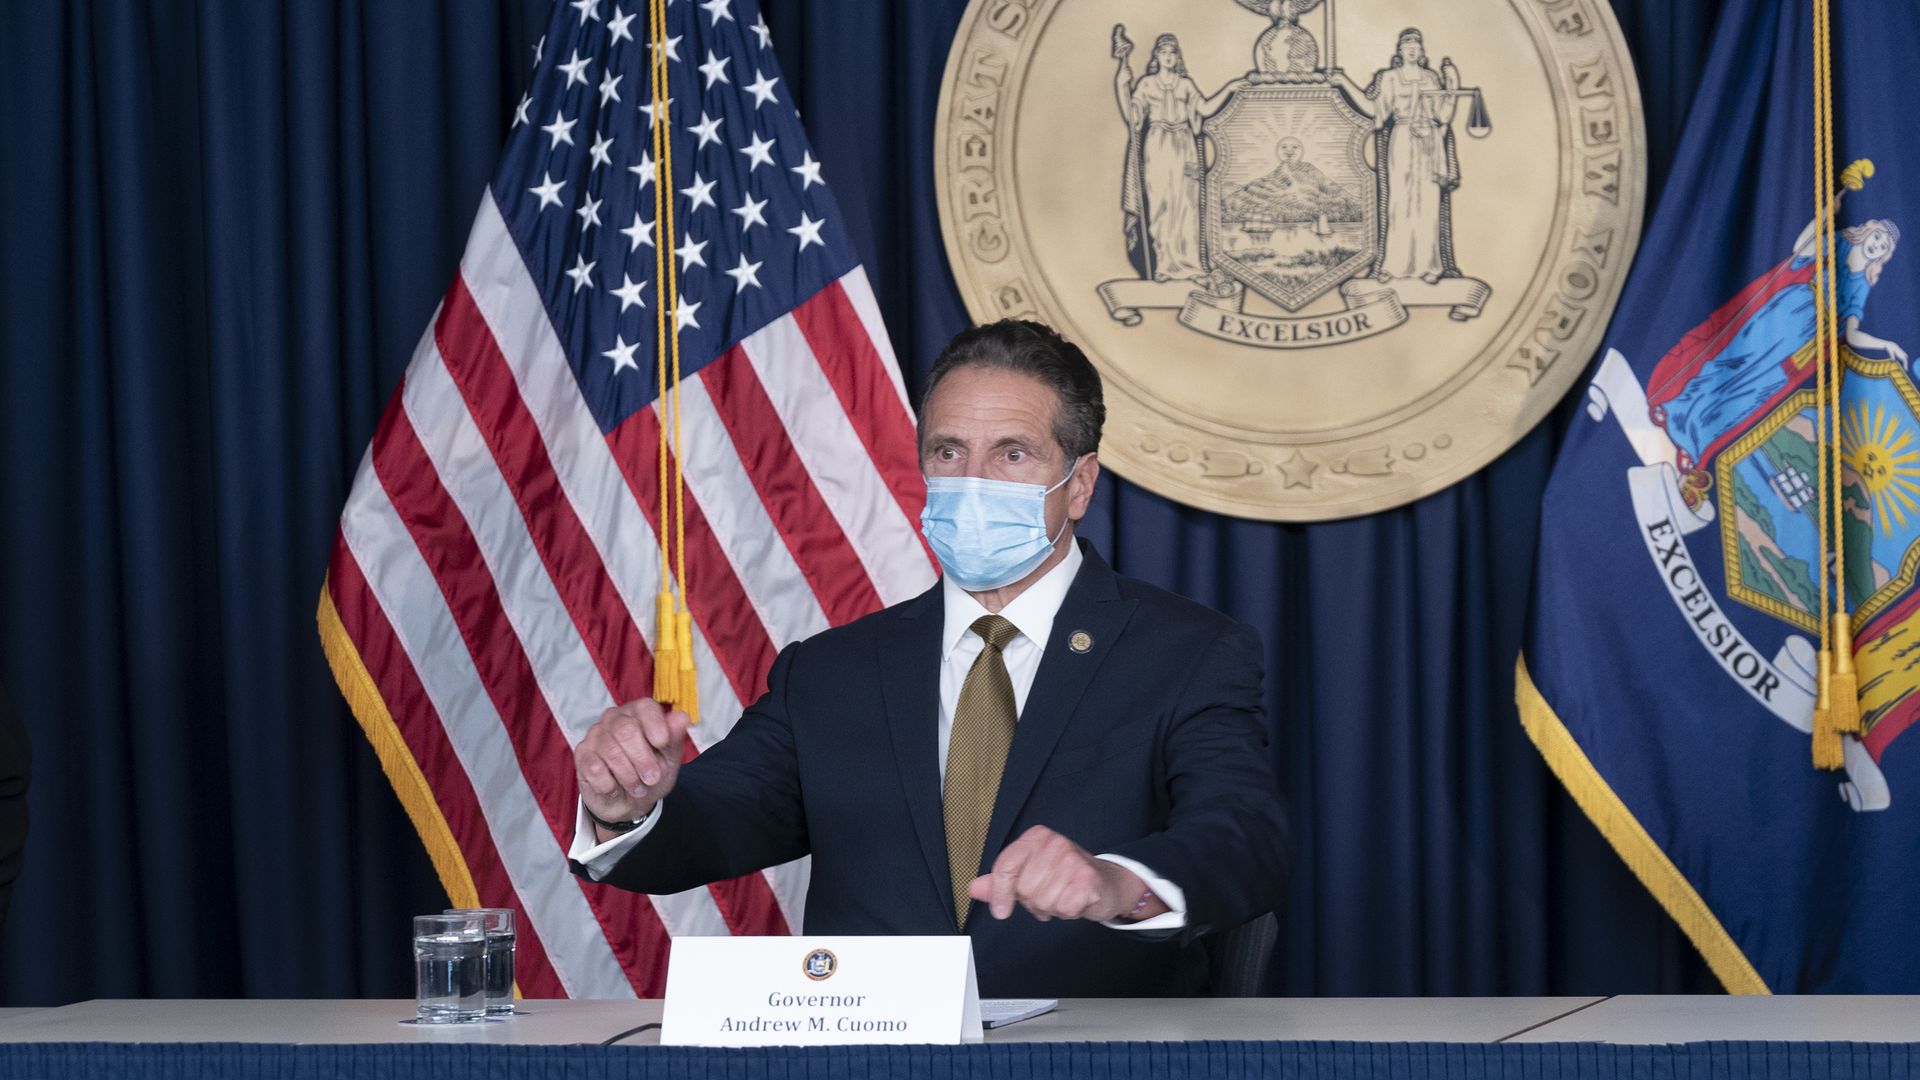 Cuomo wears a face mask in front of an American flag and New York state crest